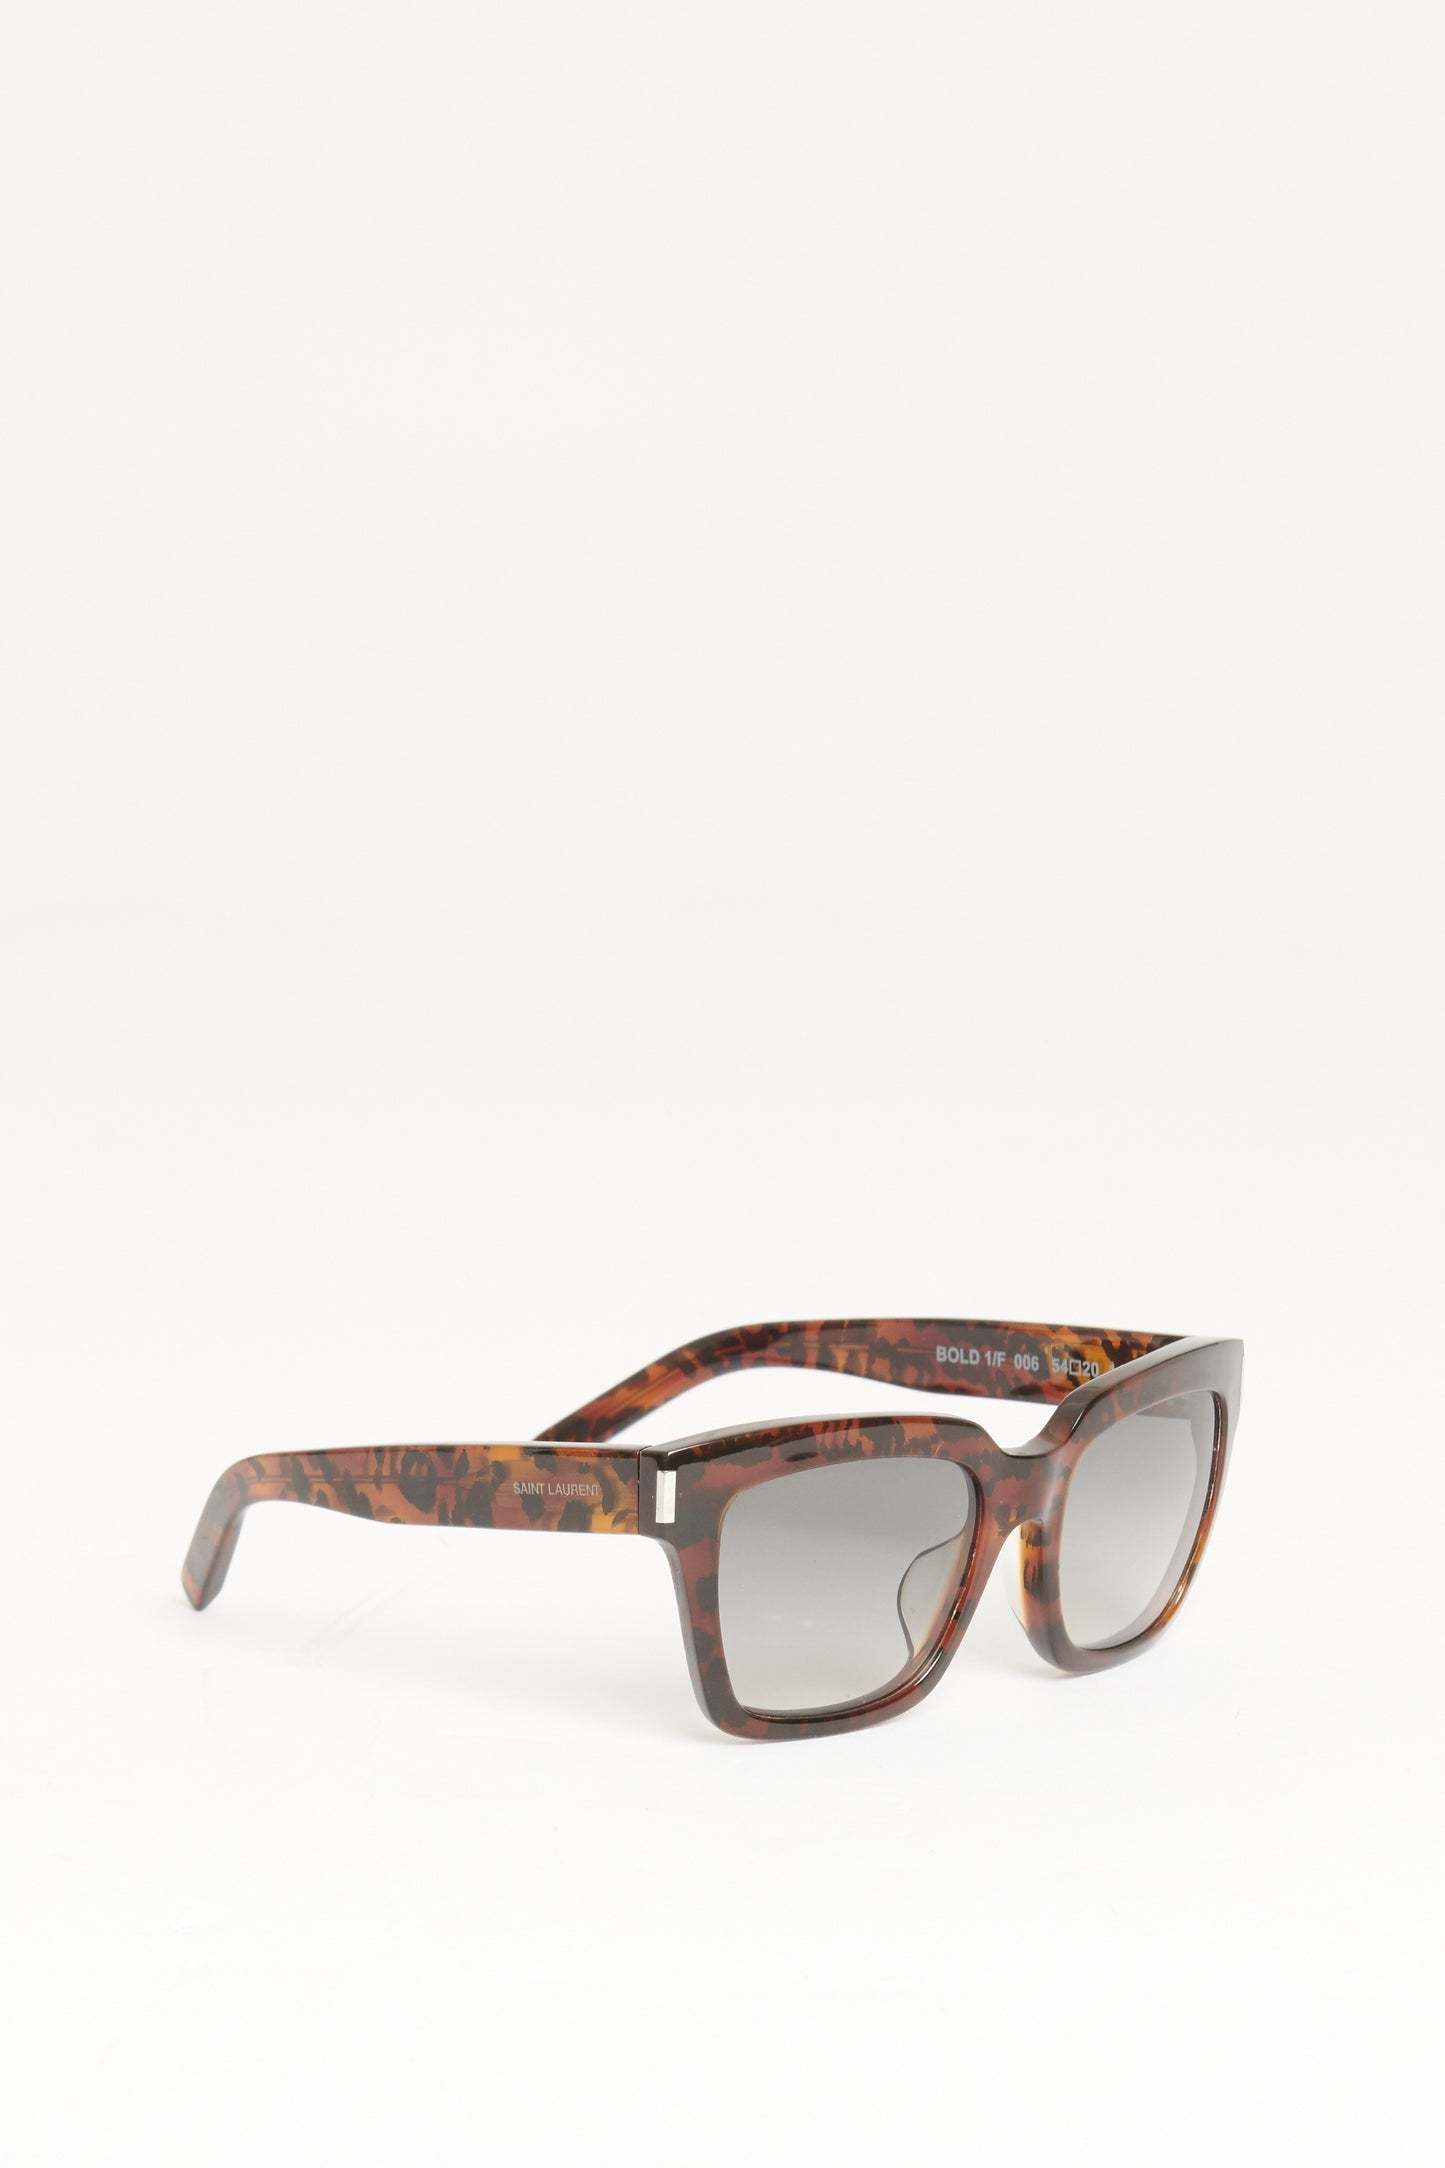 Brown Acetate Preowned Bold Sunglasses